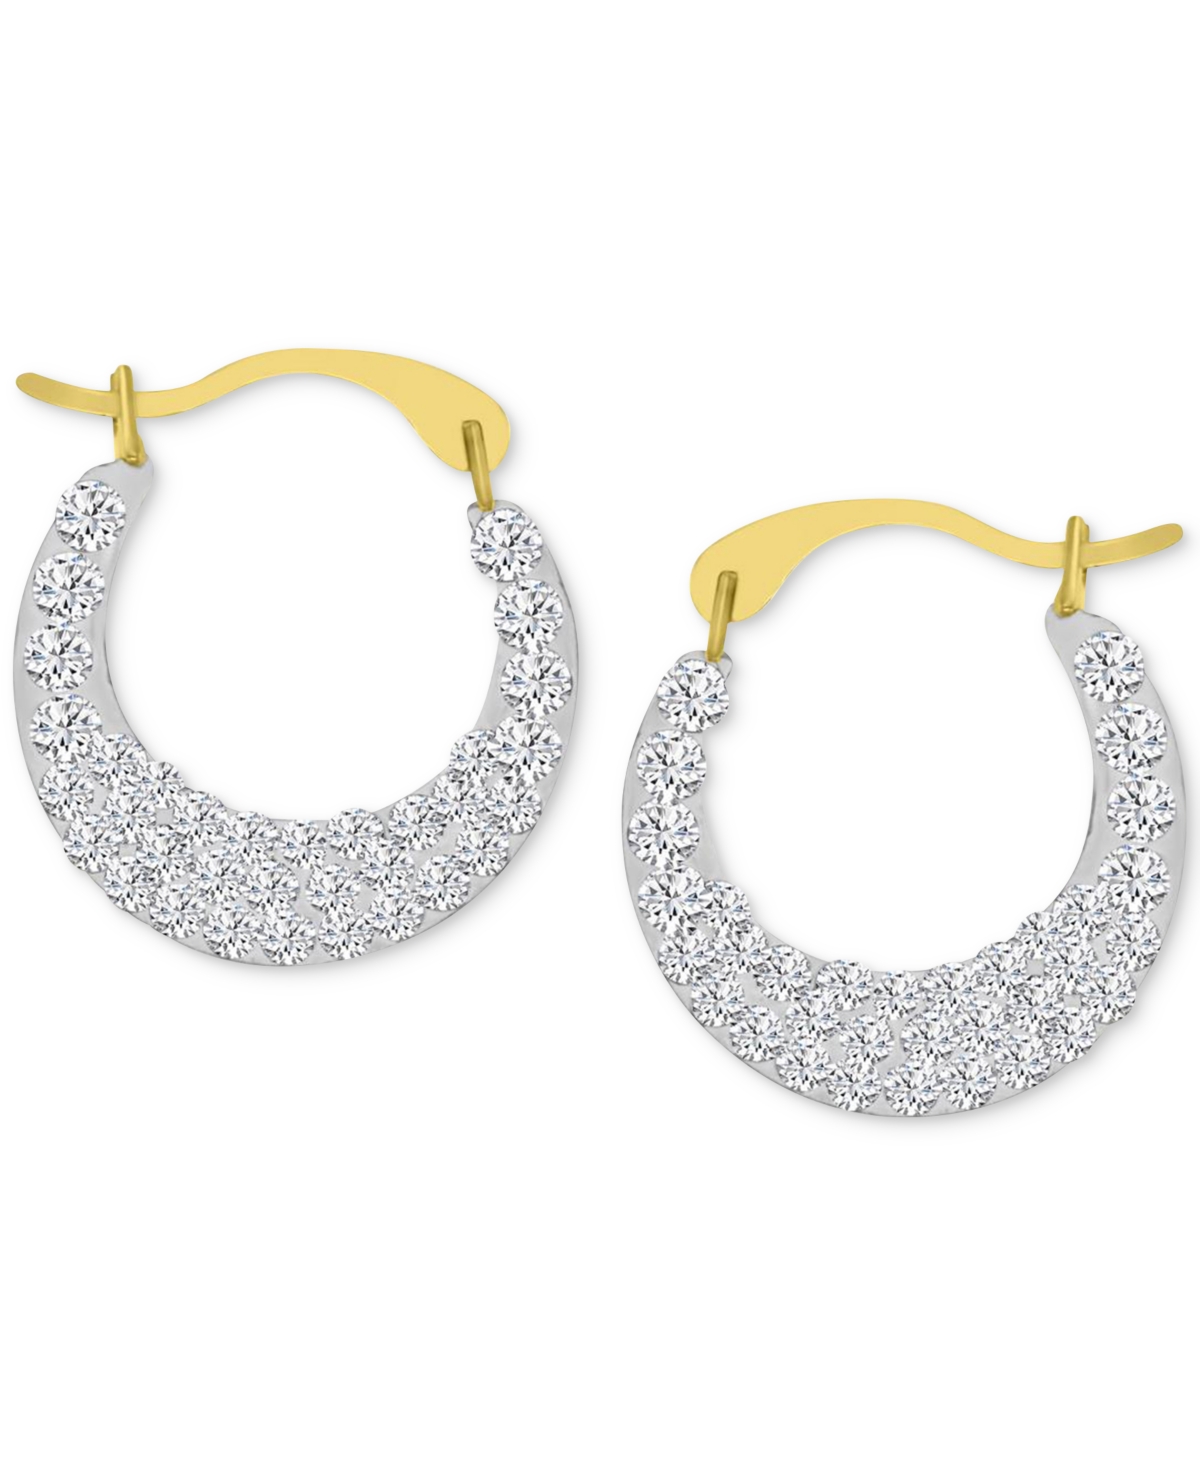 Crystal Pave Small Hoop Earrings in 10k Gold, 0.61" - Gold